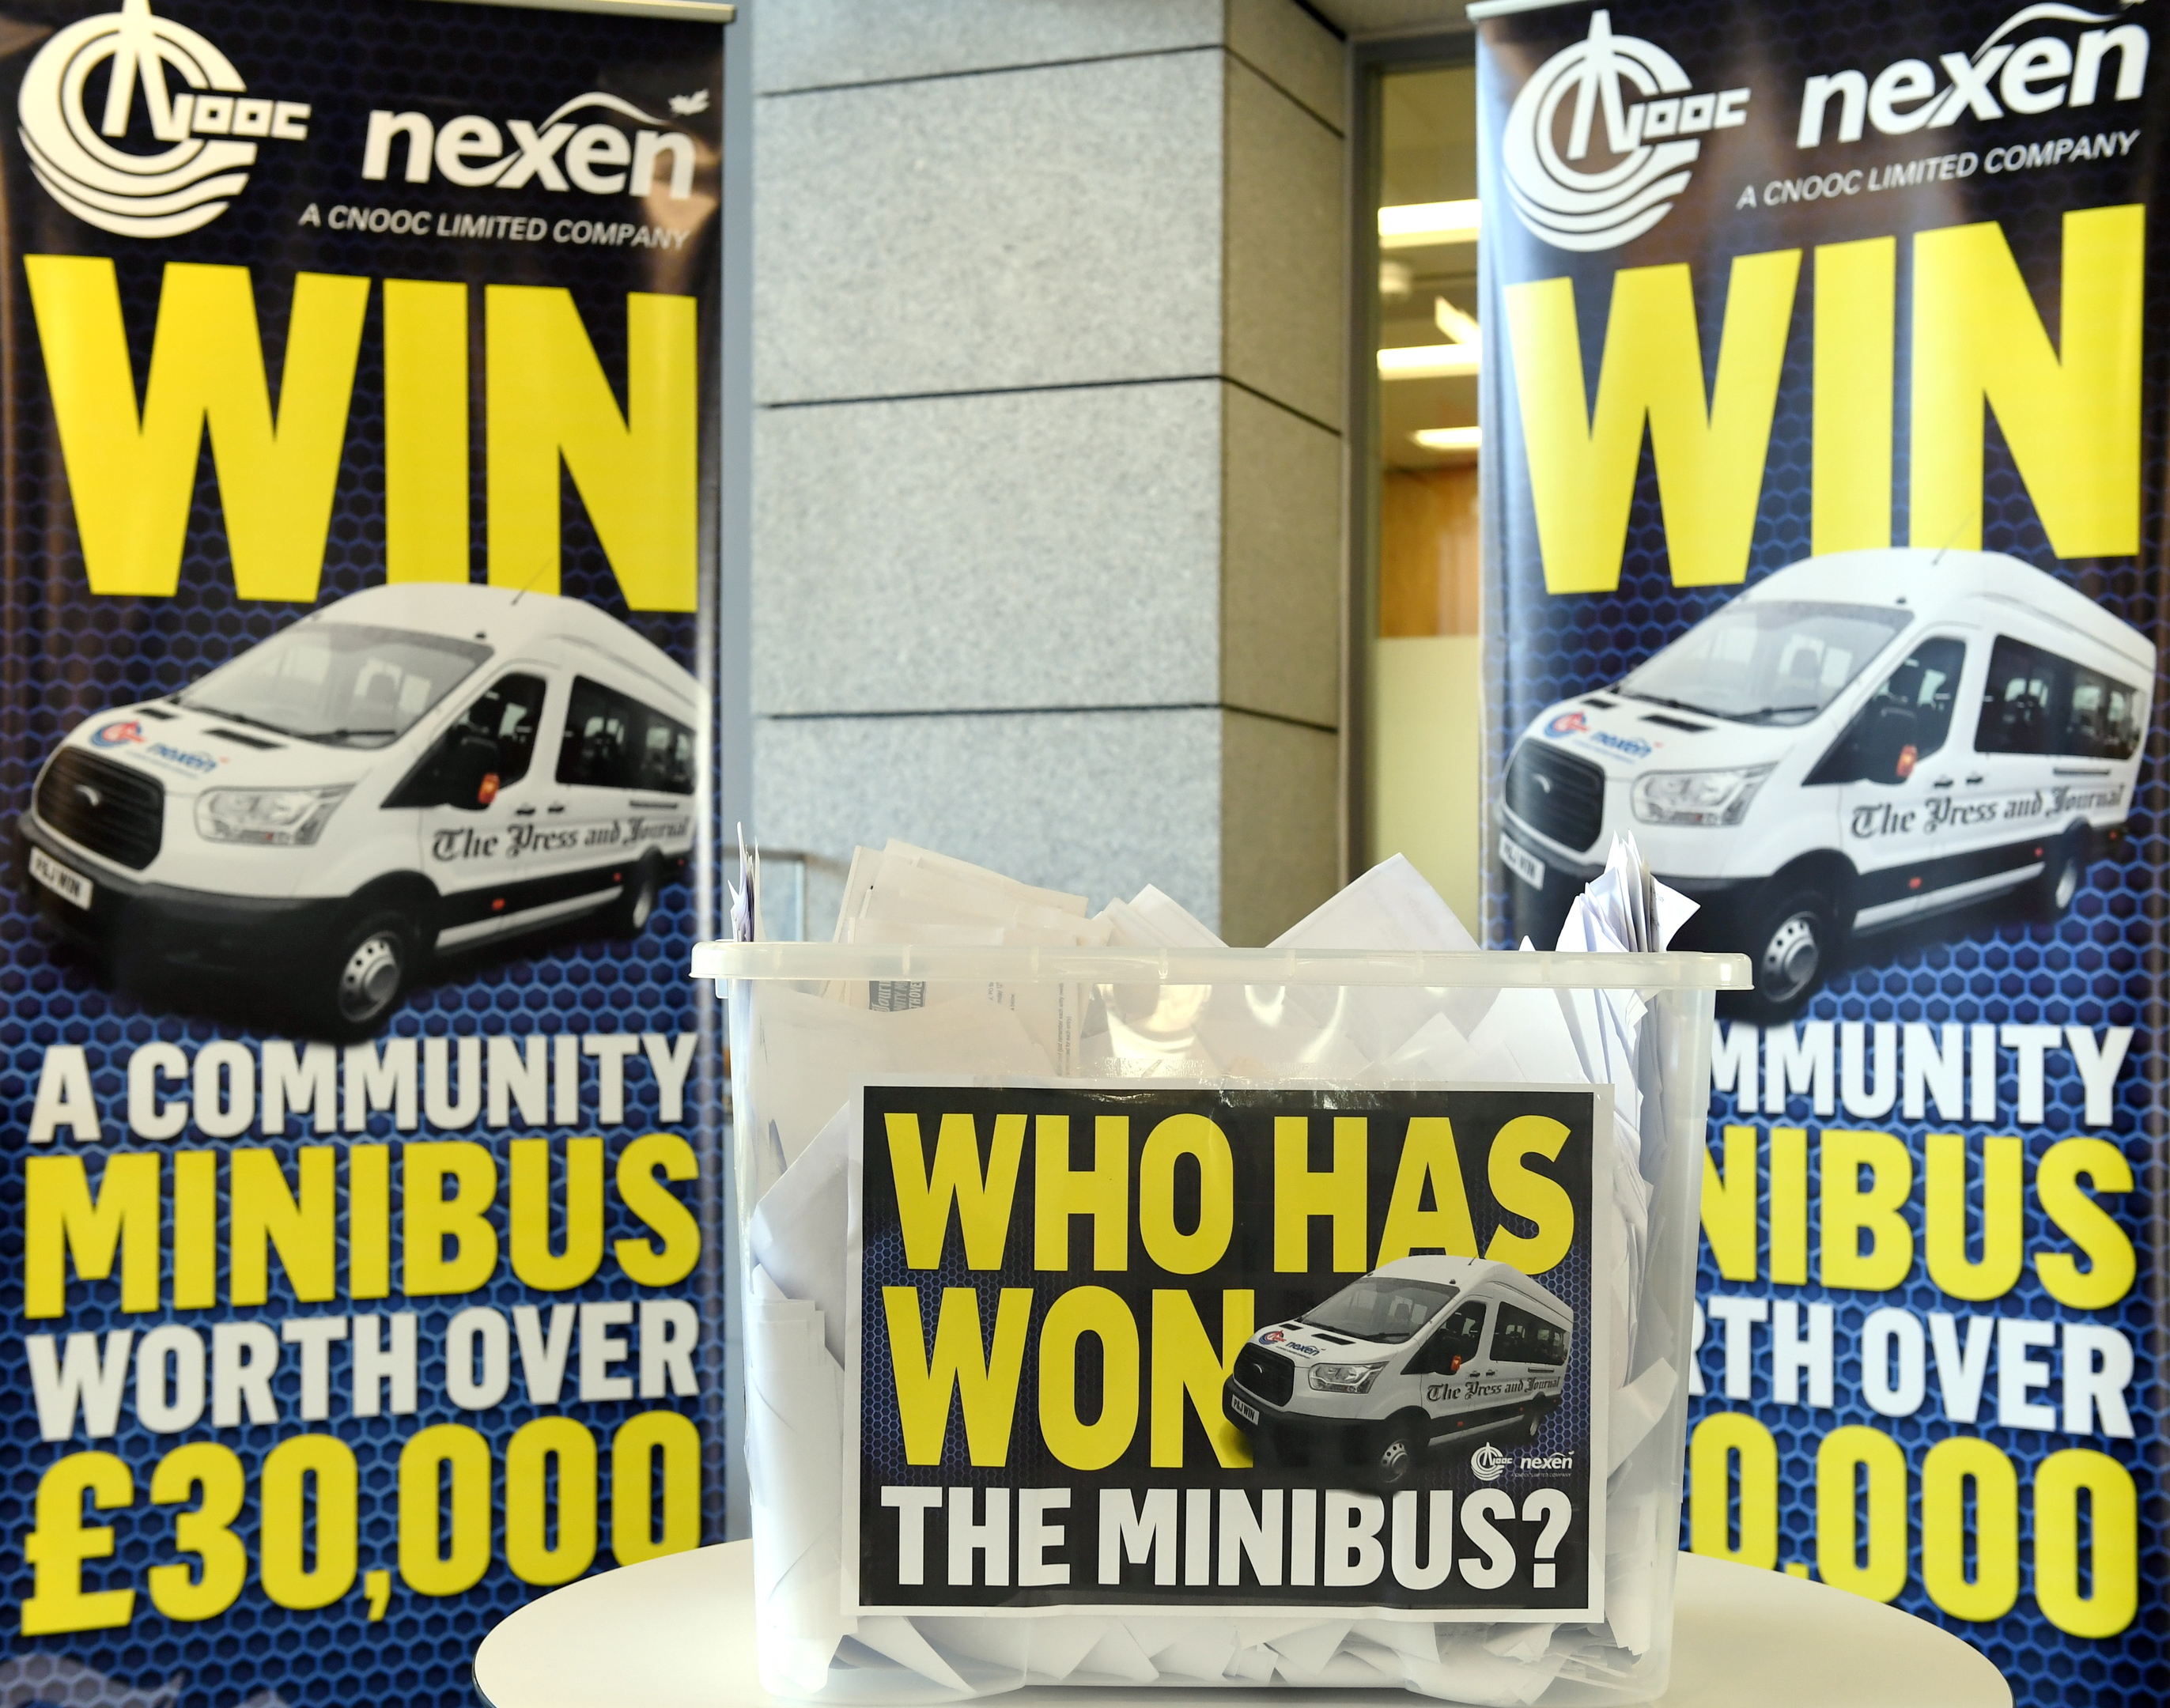 Press and Journal and Nexen, Community Mini Bus Competition.